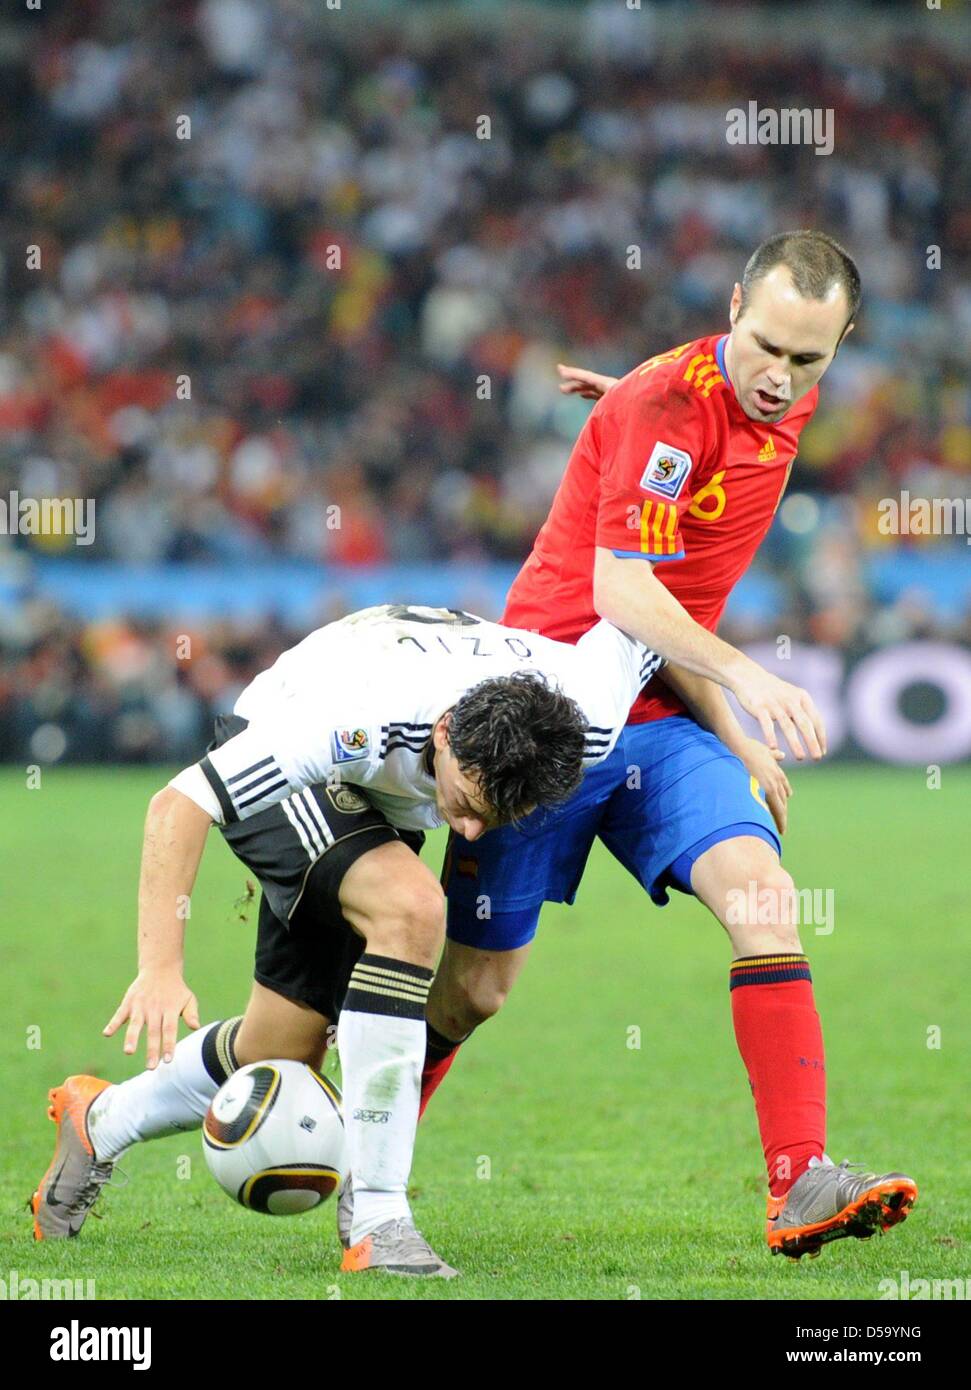 Andres Iniesta (R) of Spain vies with Mesut Oezil of Germany during the 2010 FIFA World Cup semi-final match between Germany and Spain at the Durban Stadium in Durban, South Africa 07 July 2010. Photo: Bernd Weissbrod dpa - Please refer to http://dpaq.de/FIFA-WM2010-TC Stock Photo